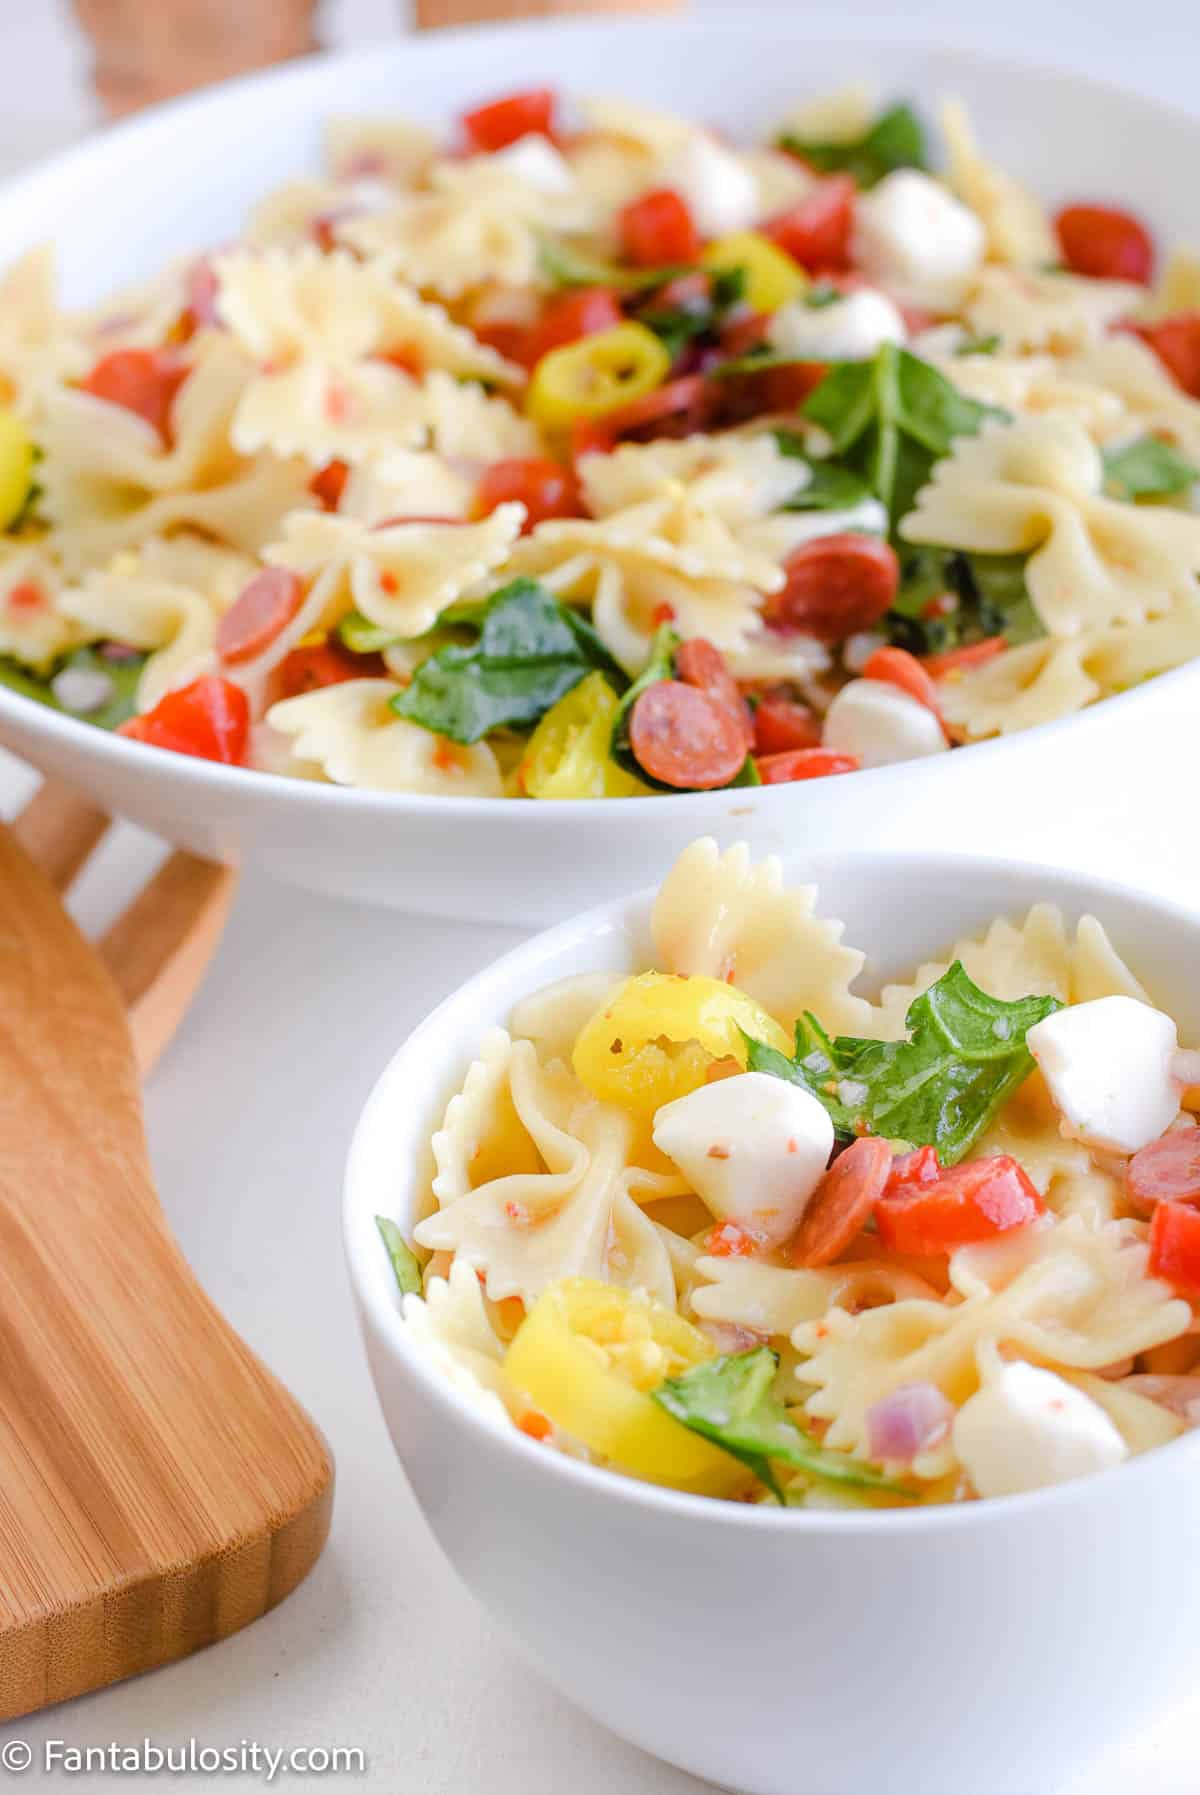 
Bowls of zesty pasta salad with tomatoes and banana peppers.	
